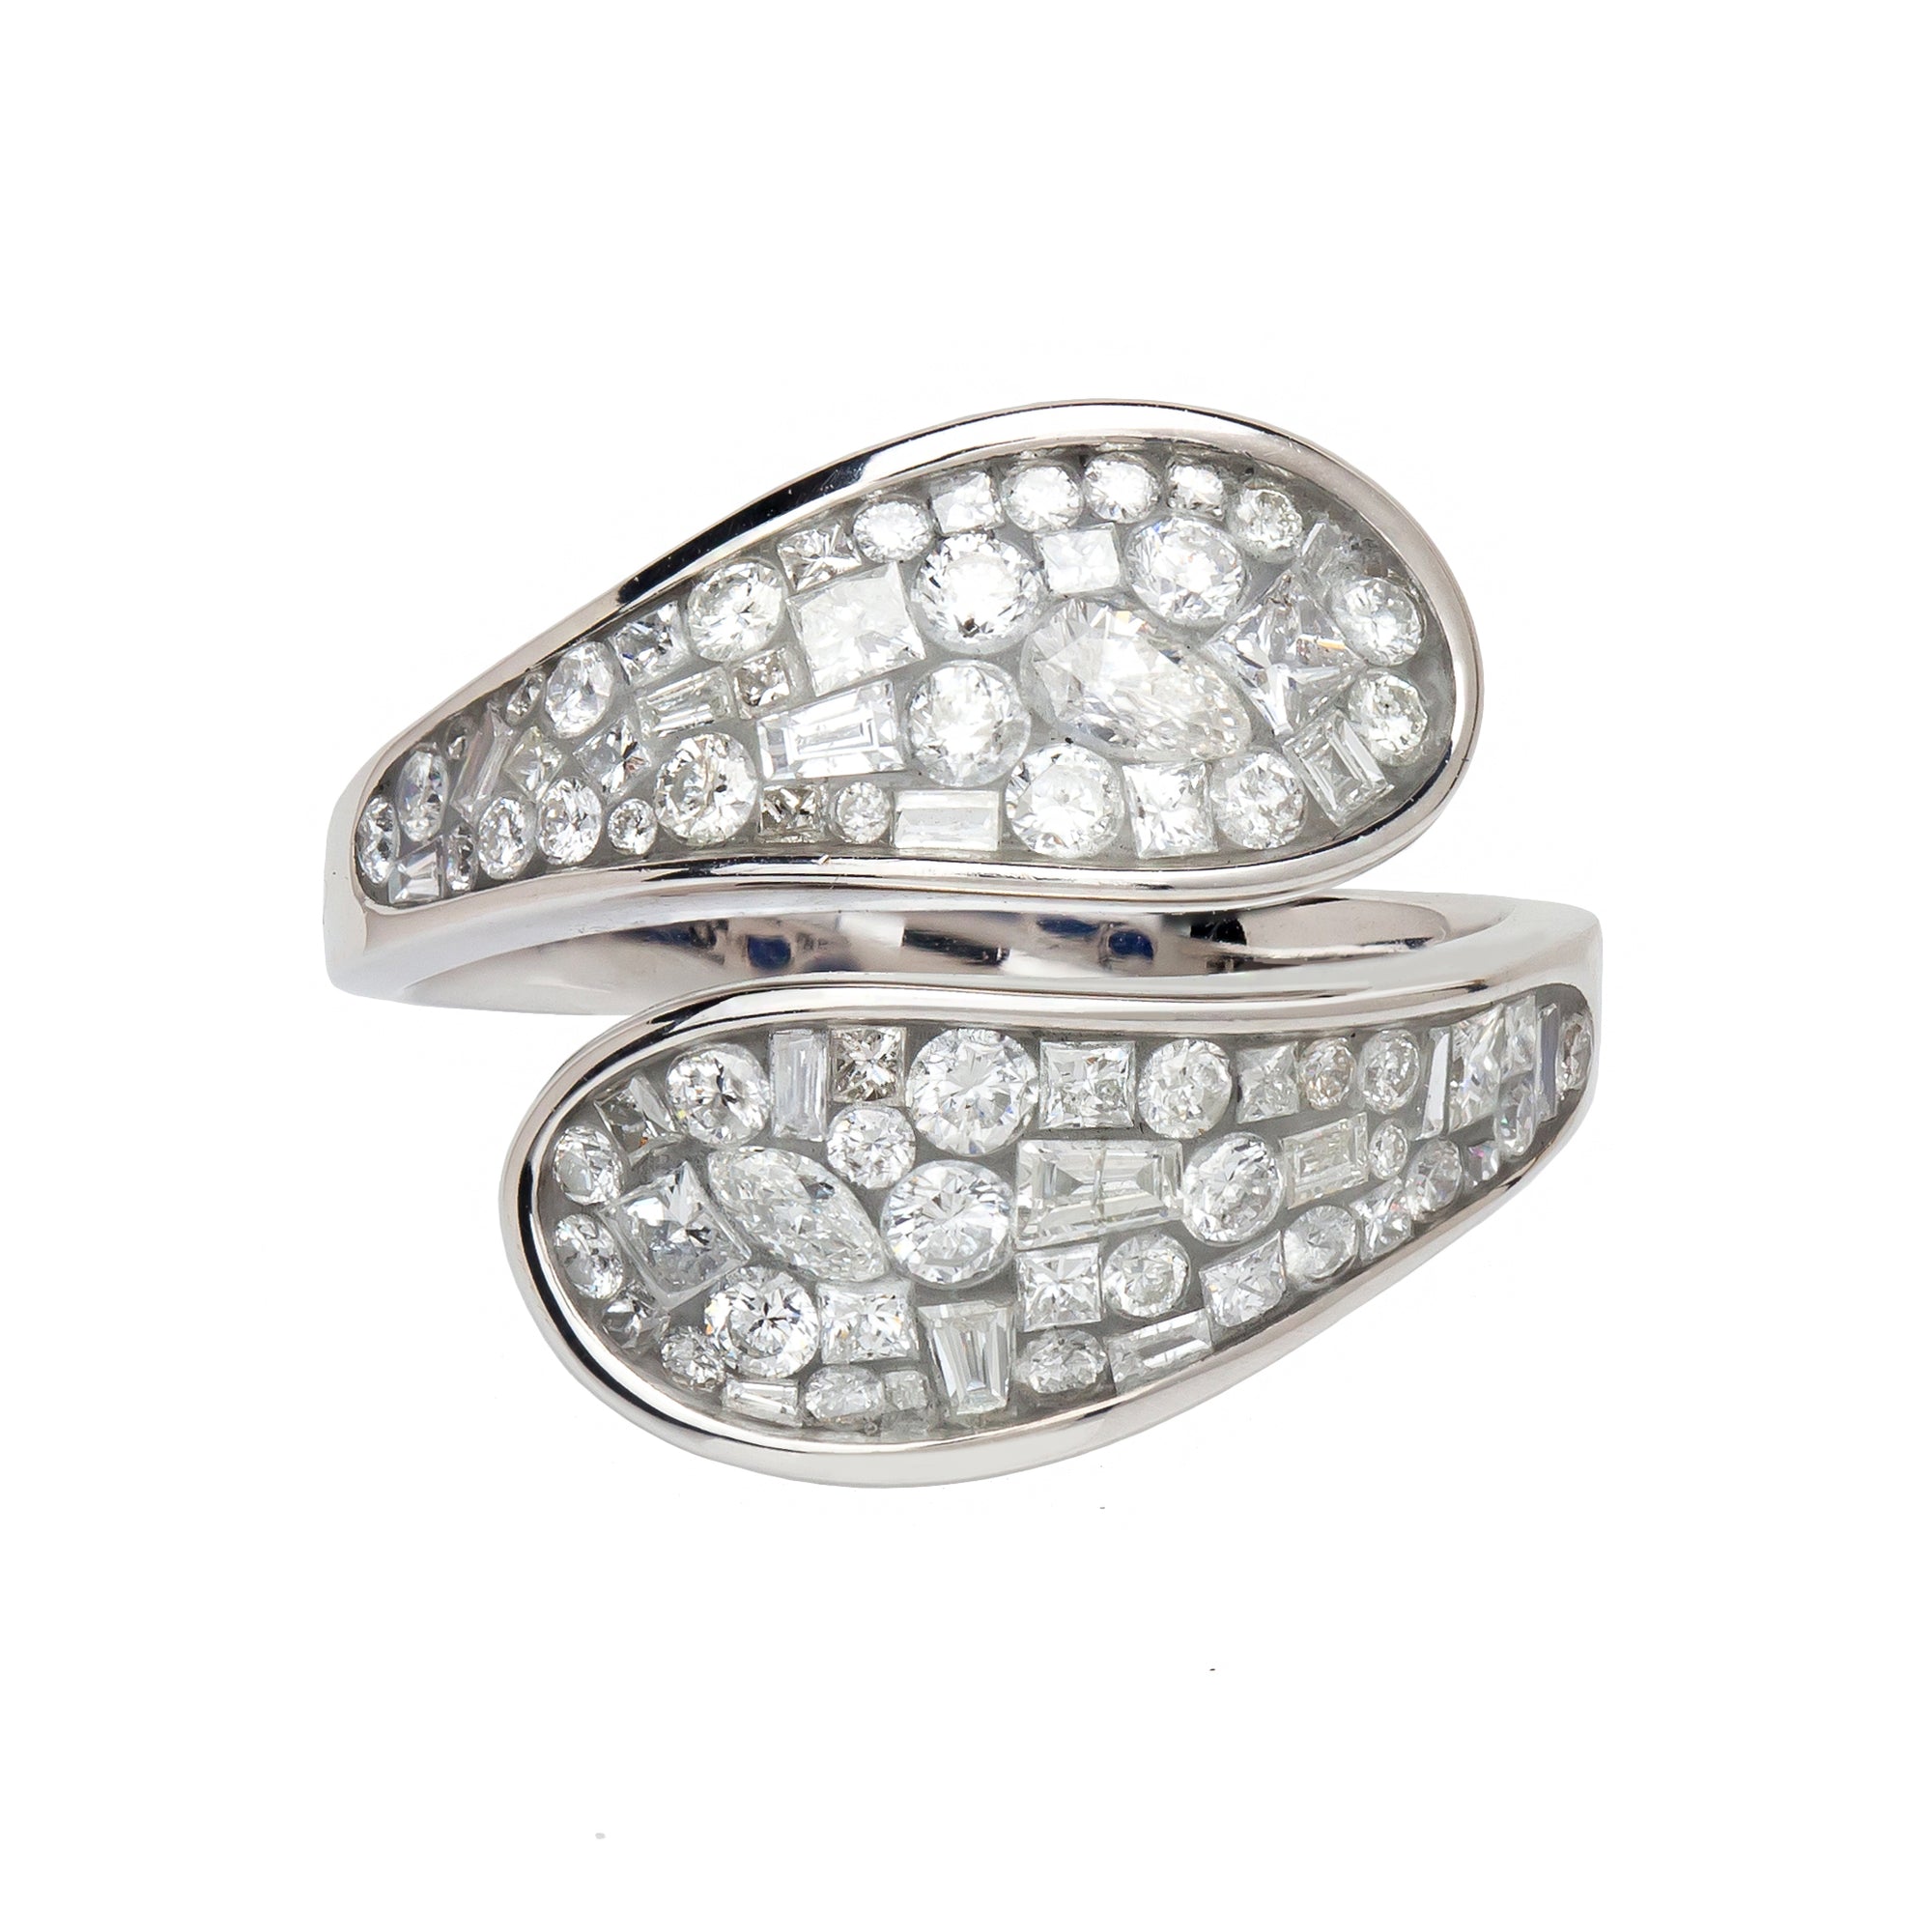 Ice Bypass Diamond Ring by Pleve available at Talisman Collection Fine Jewelers in El Dorado Hills, CA and online. Specs: 1.45 cttw diamonds, 18k white gold. 